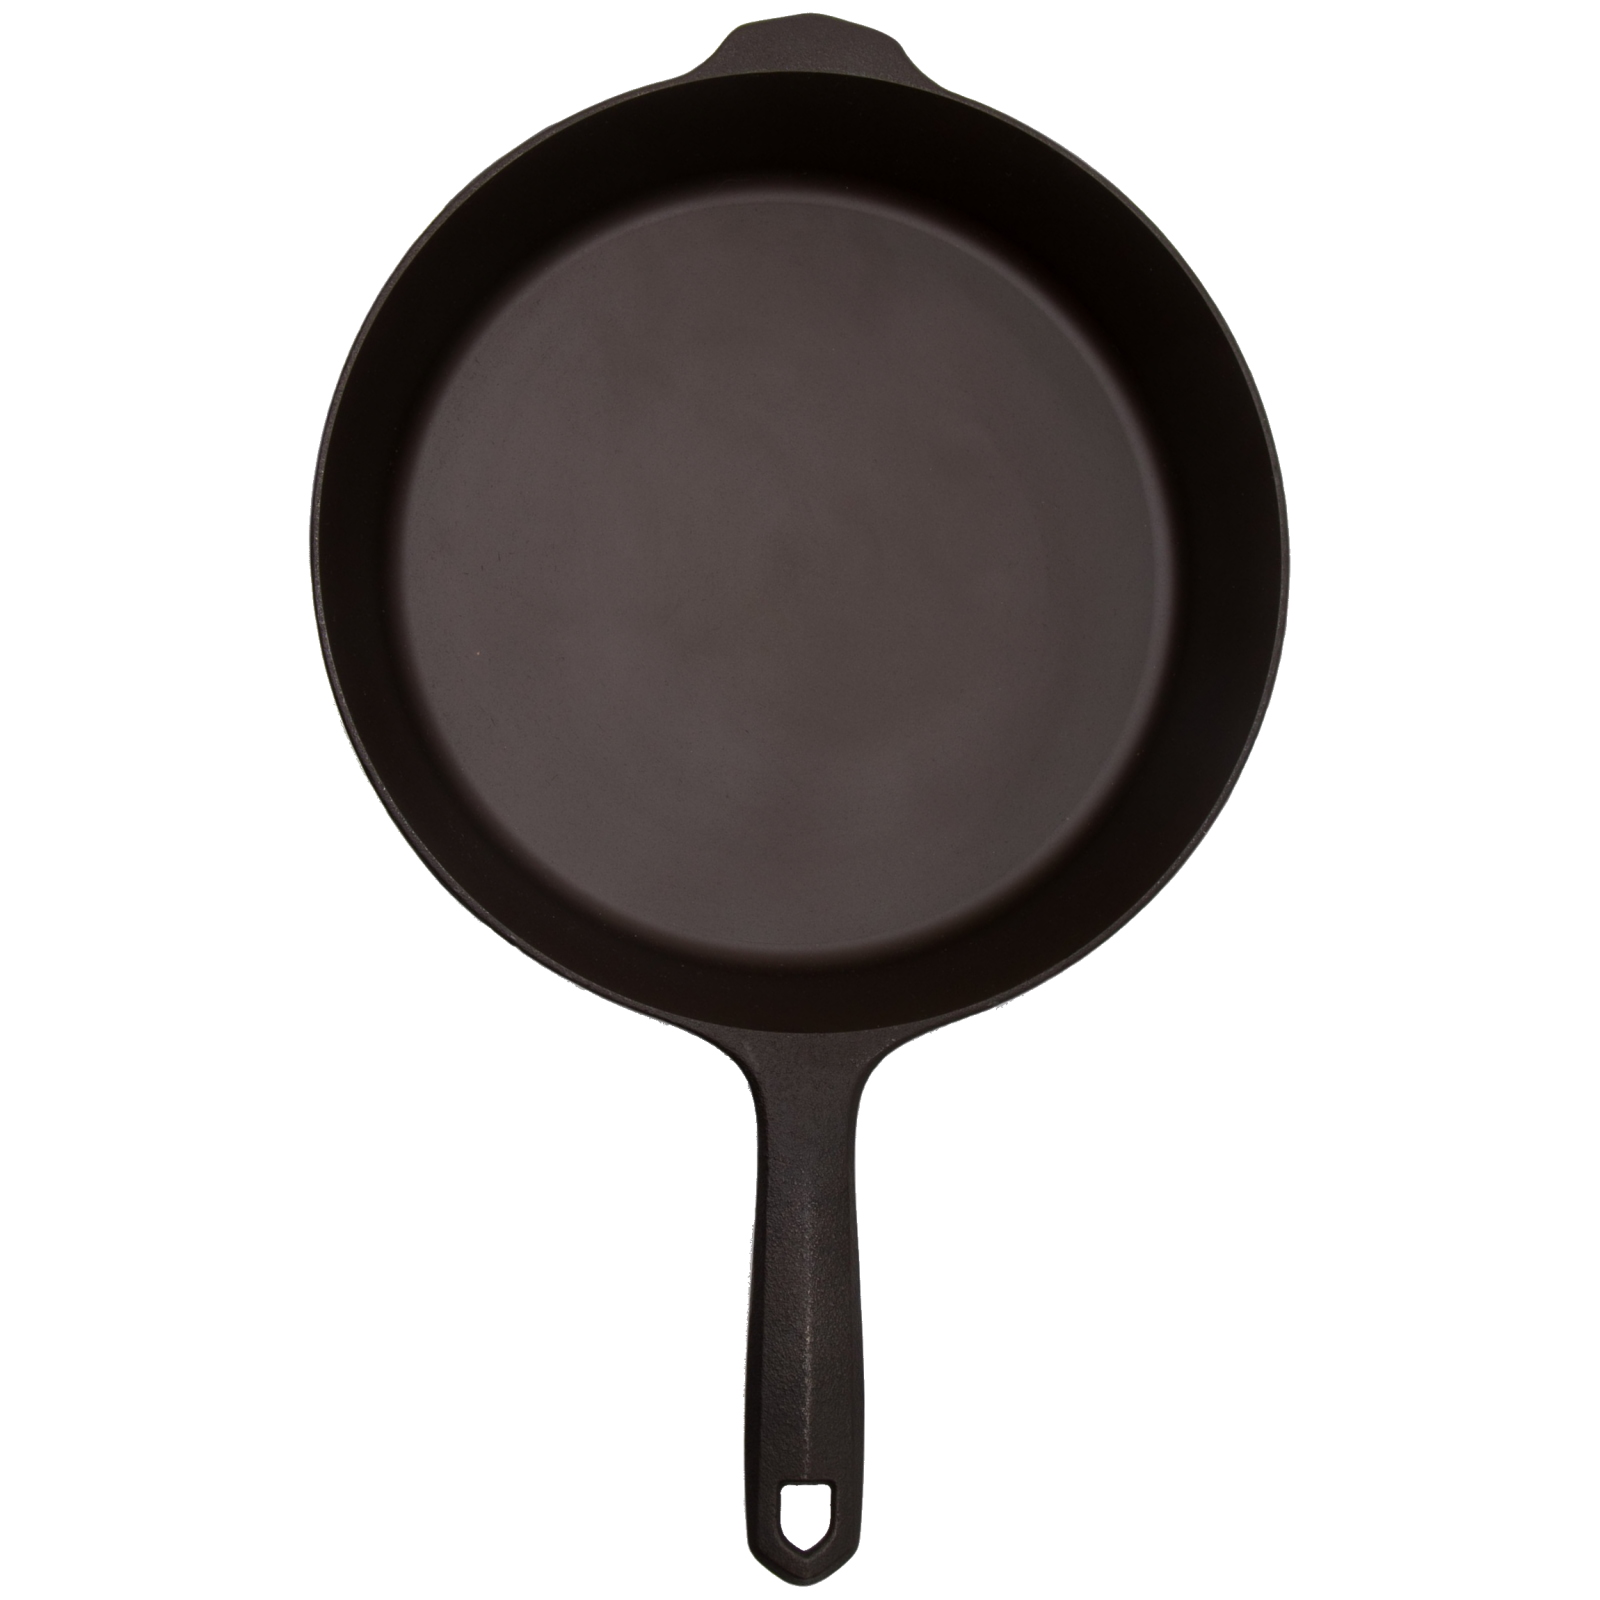 Field Cast Iron Skillet No. 8 - 10 1/4” top , 8 3/4” cooking surface